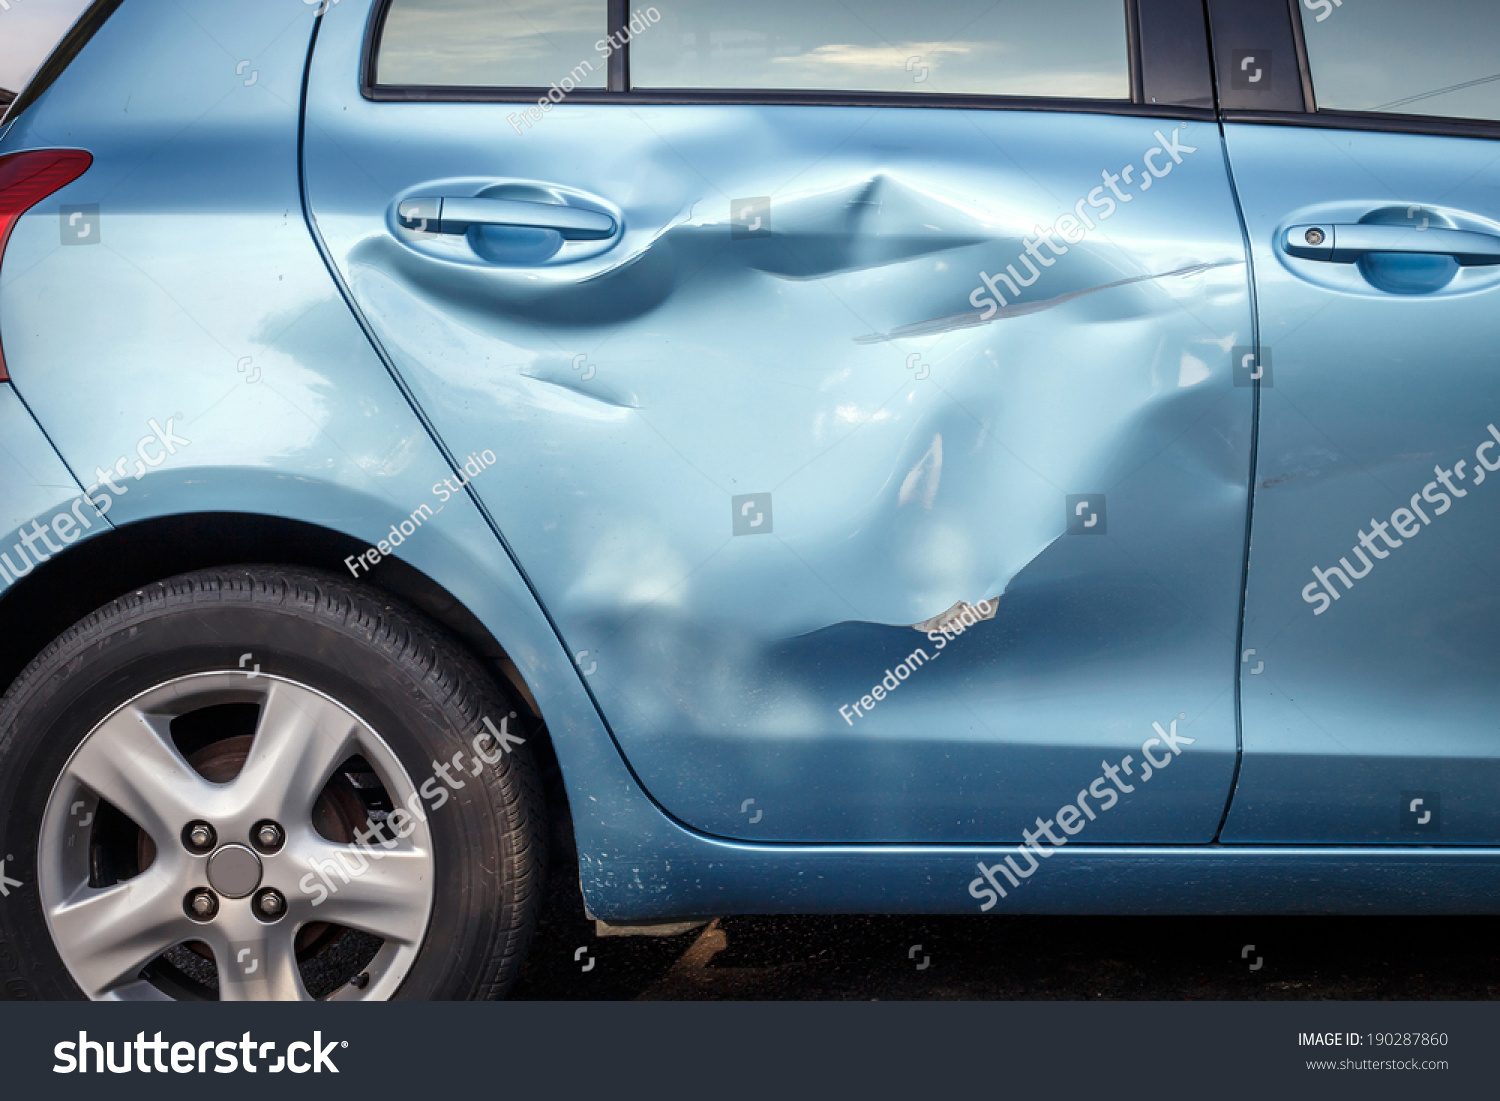 Body of car get damaged by accident #190287860